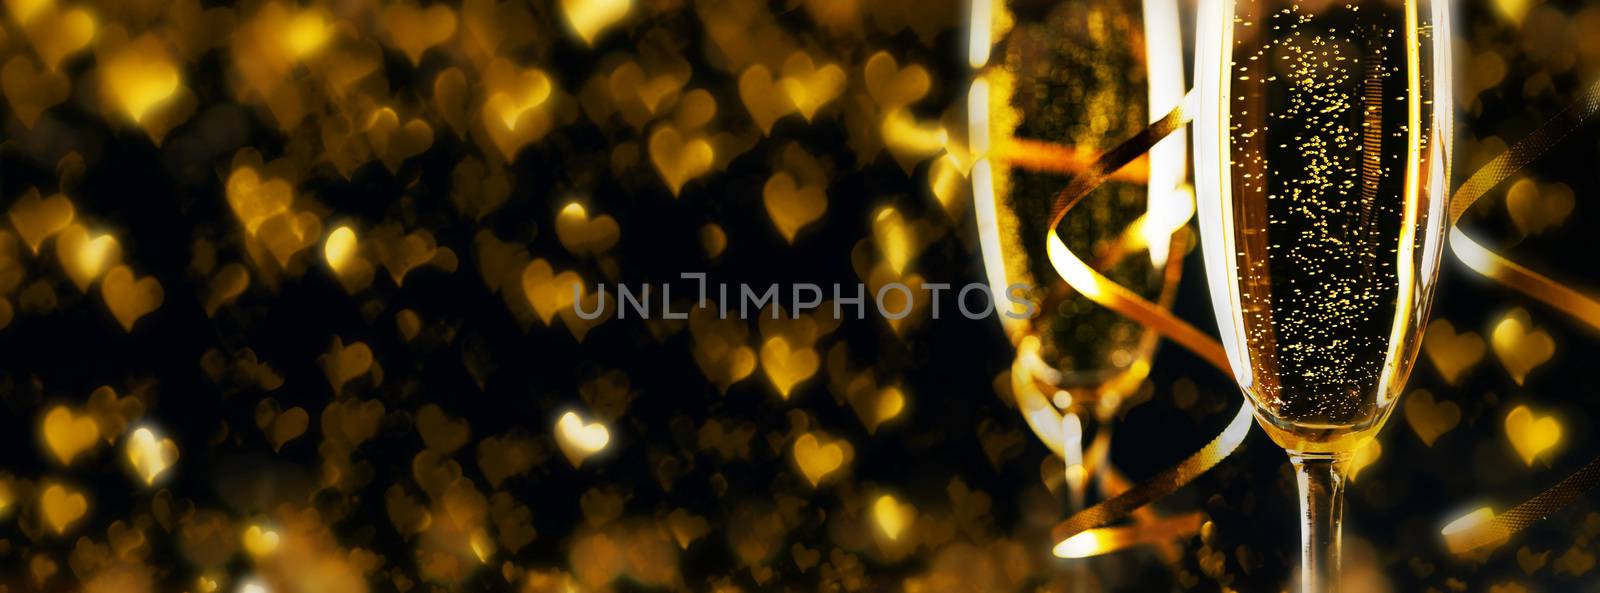 Two glasses of champagne ribbons and heart shaped bokeh lights on black background, Romance, evening, dating, Valentines day concept